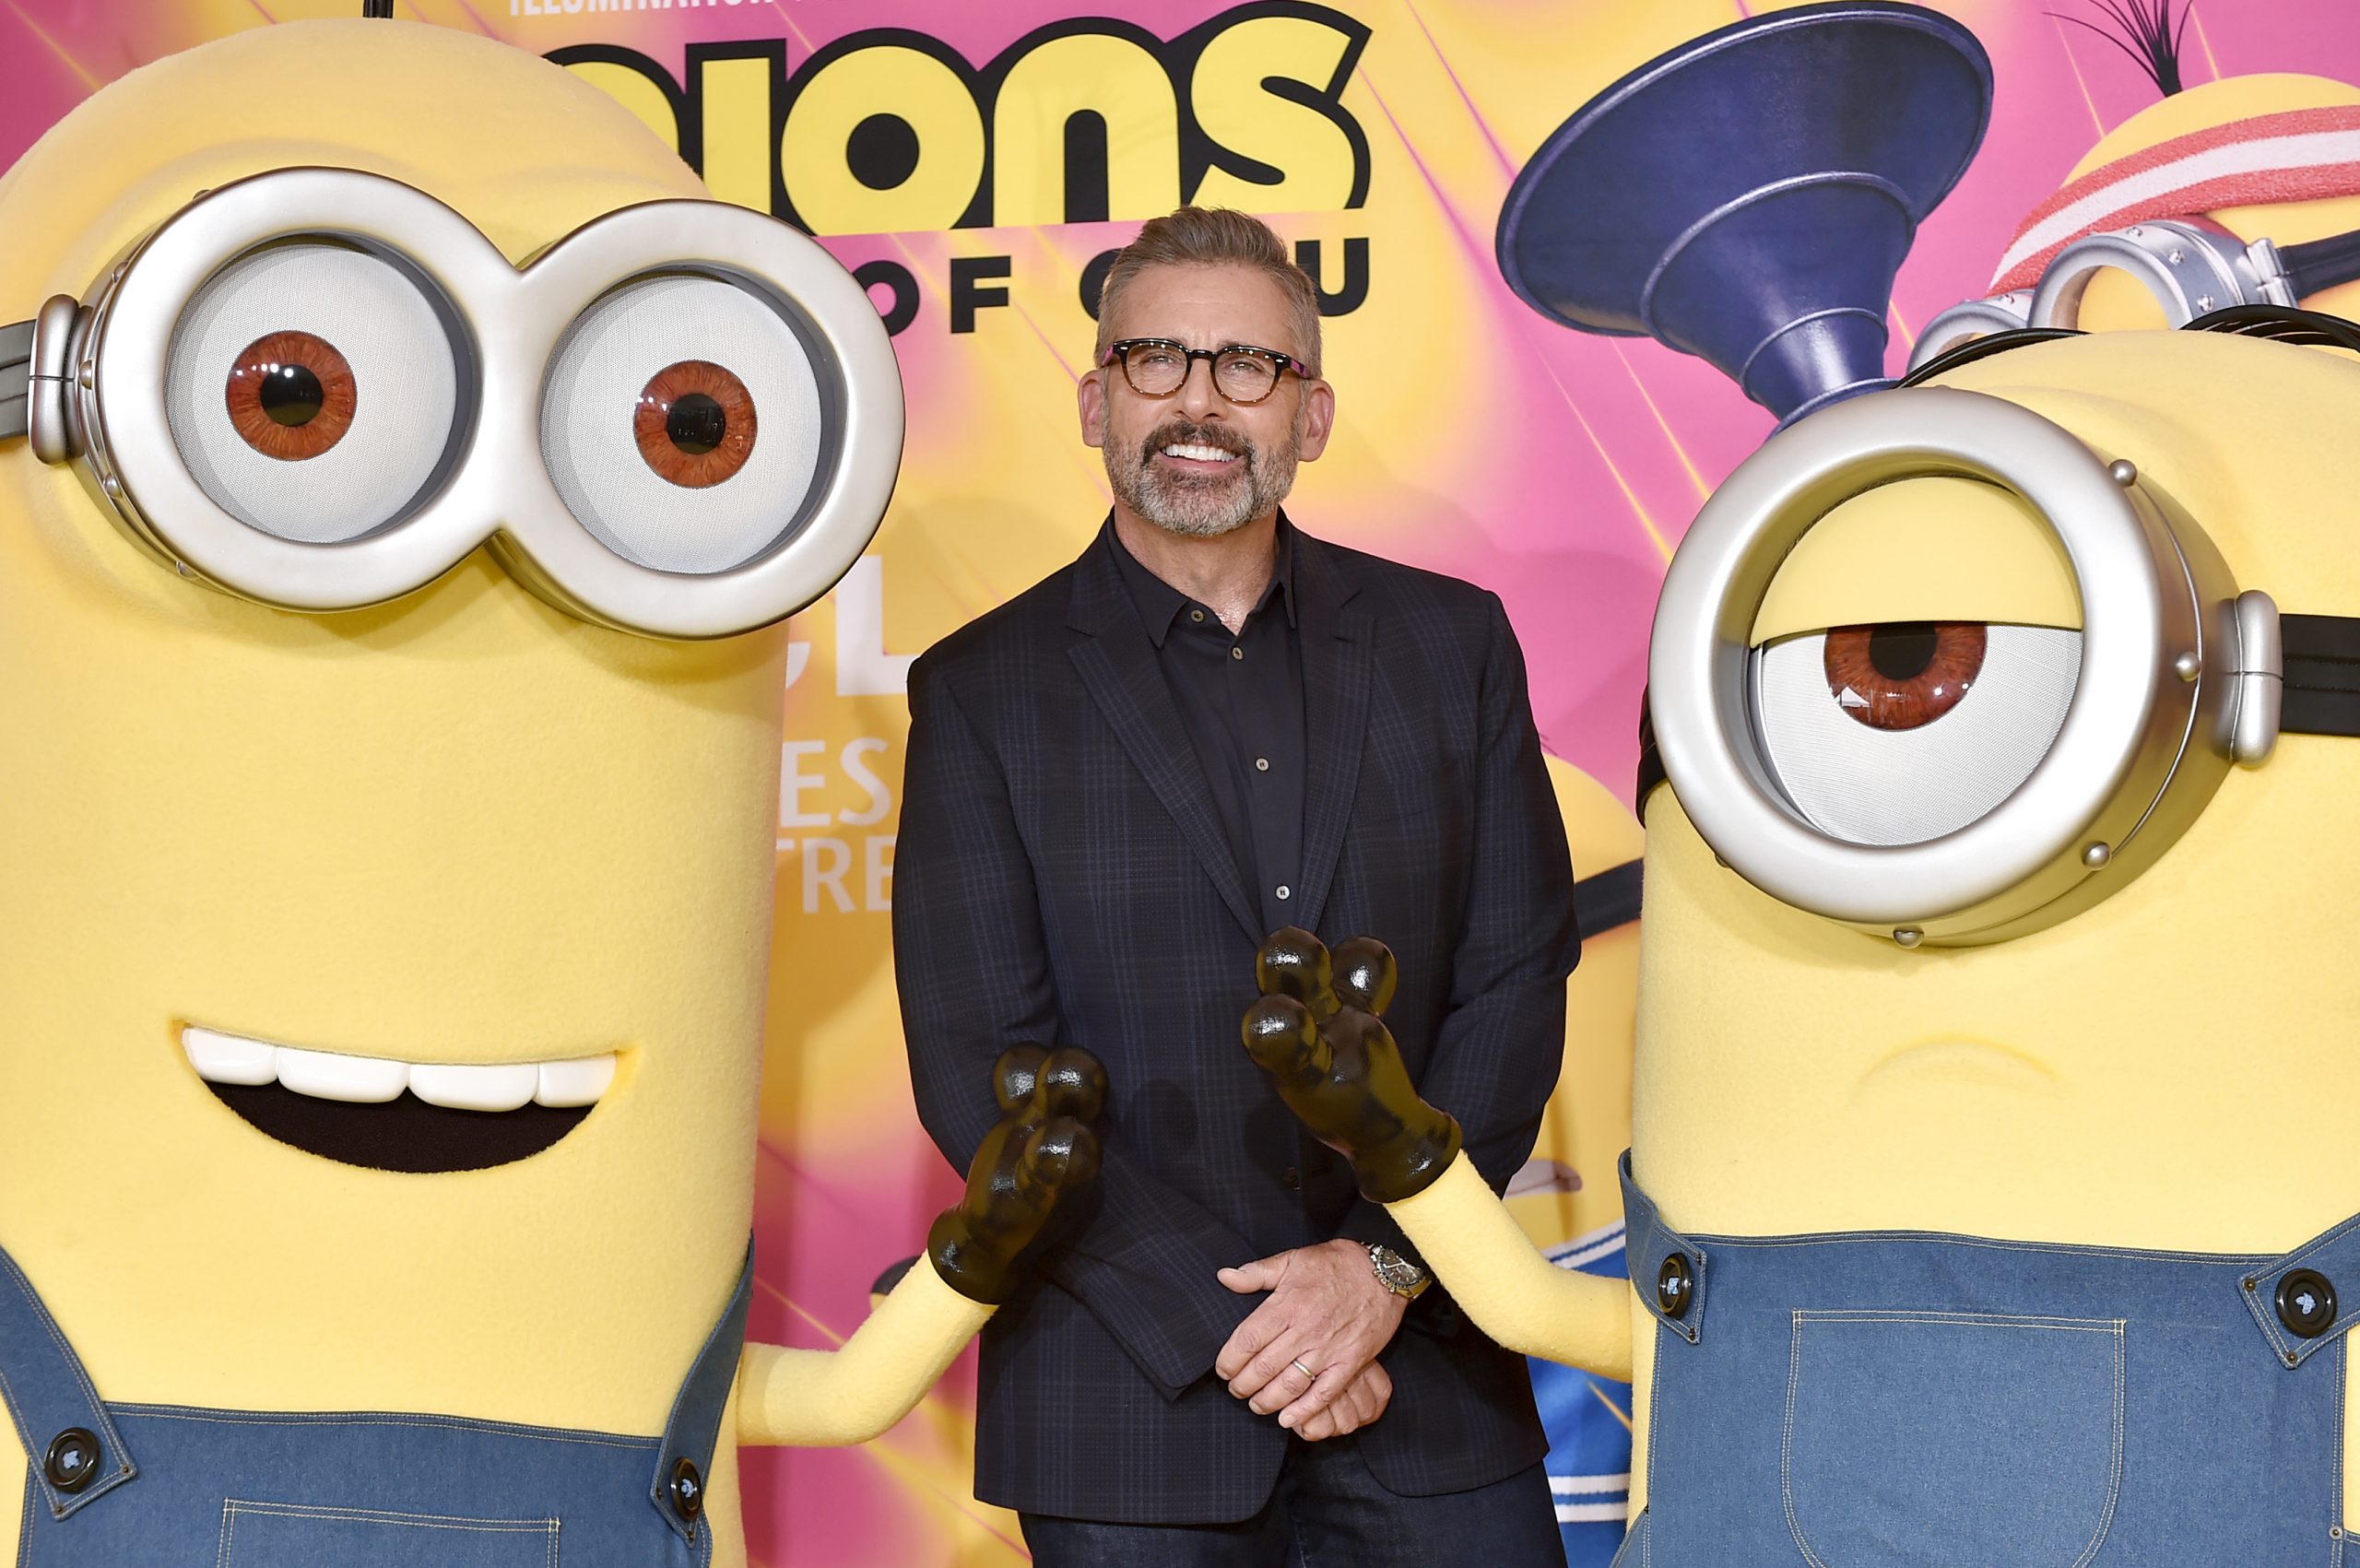 Steve Carell attends the hand/ footprints ceremony for Minions: The Rise of Gru, which has spawned a viral Tik Tok trend